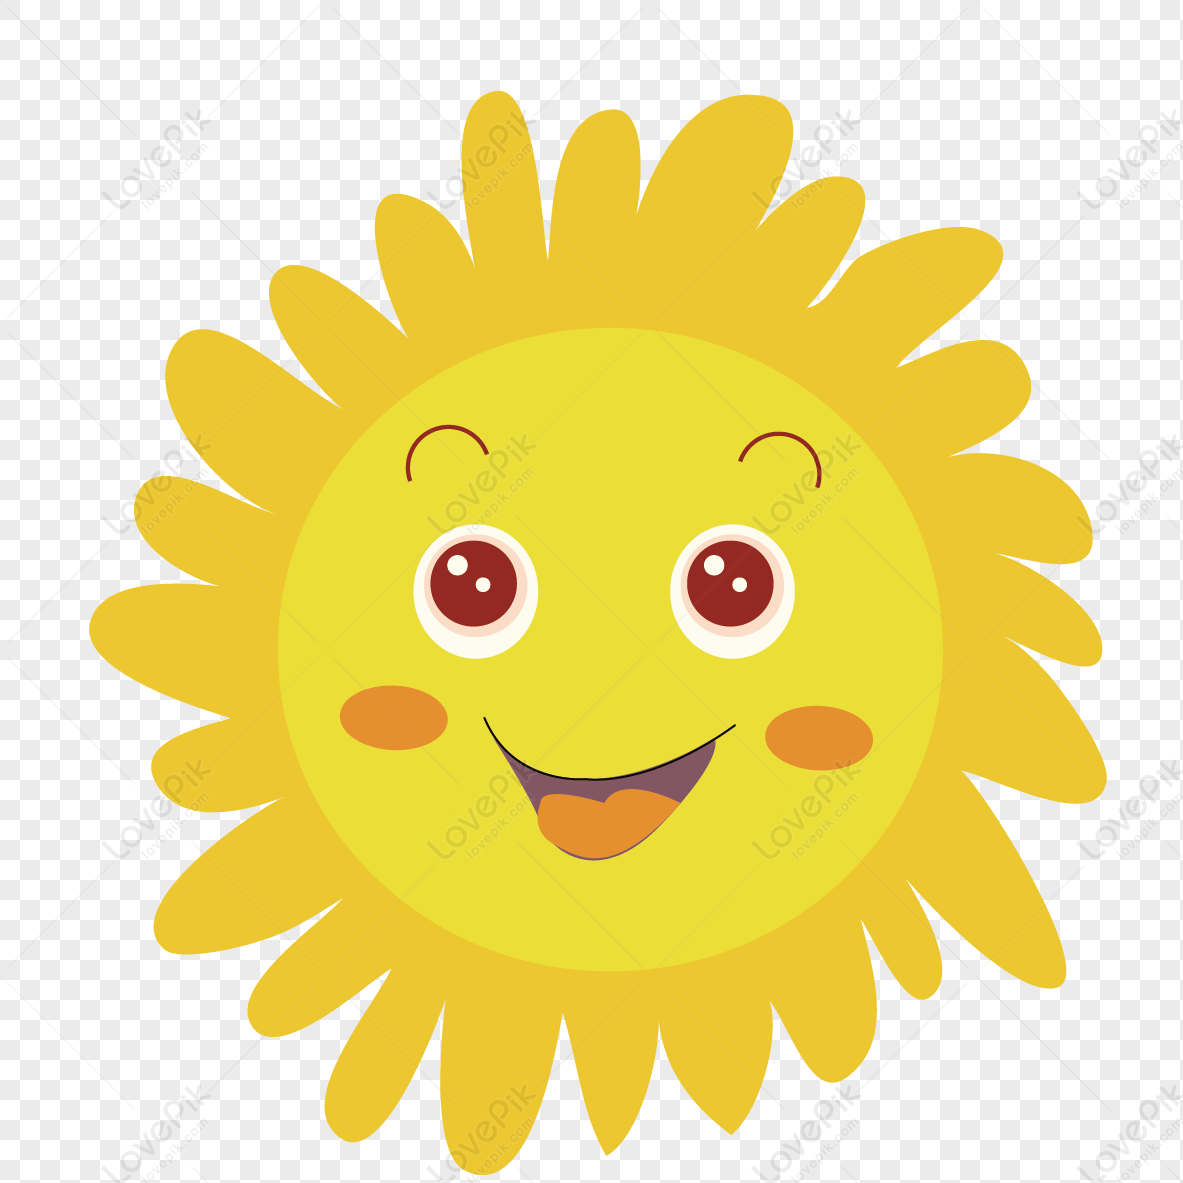 Sun Cartoon PNG Image Free Download And Clipart Image For Free Download -  Lovepik | 401535631